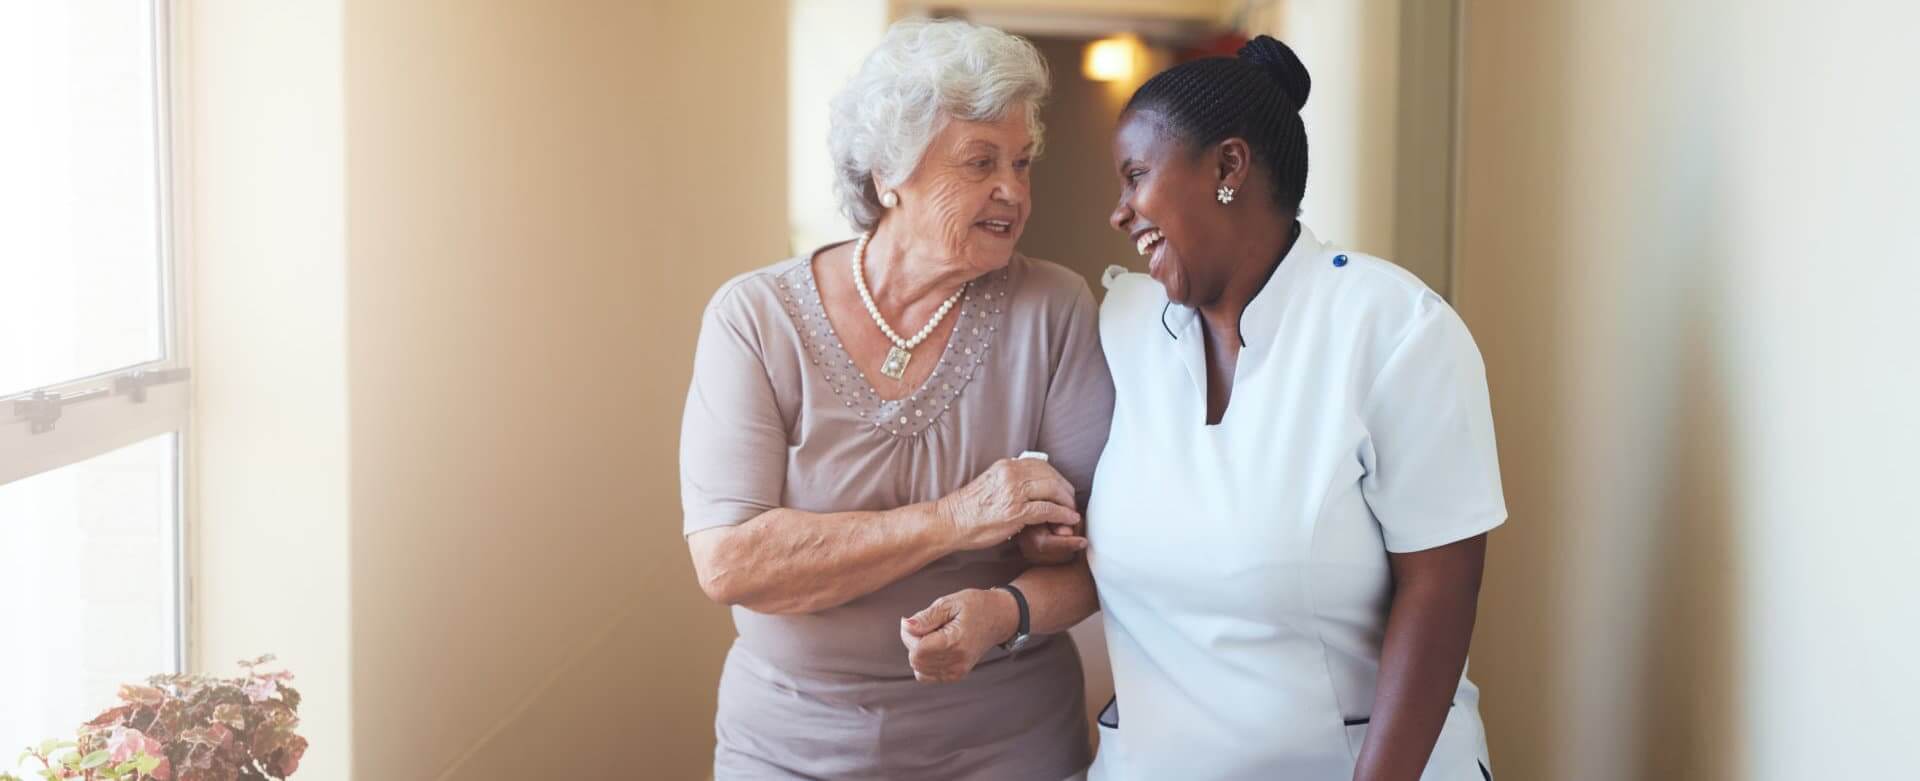 elderly smiling while holding hands with the caregiver